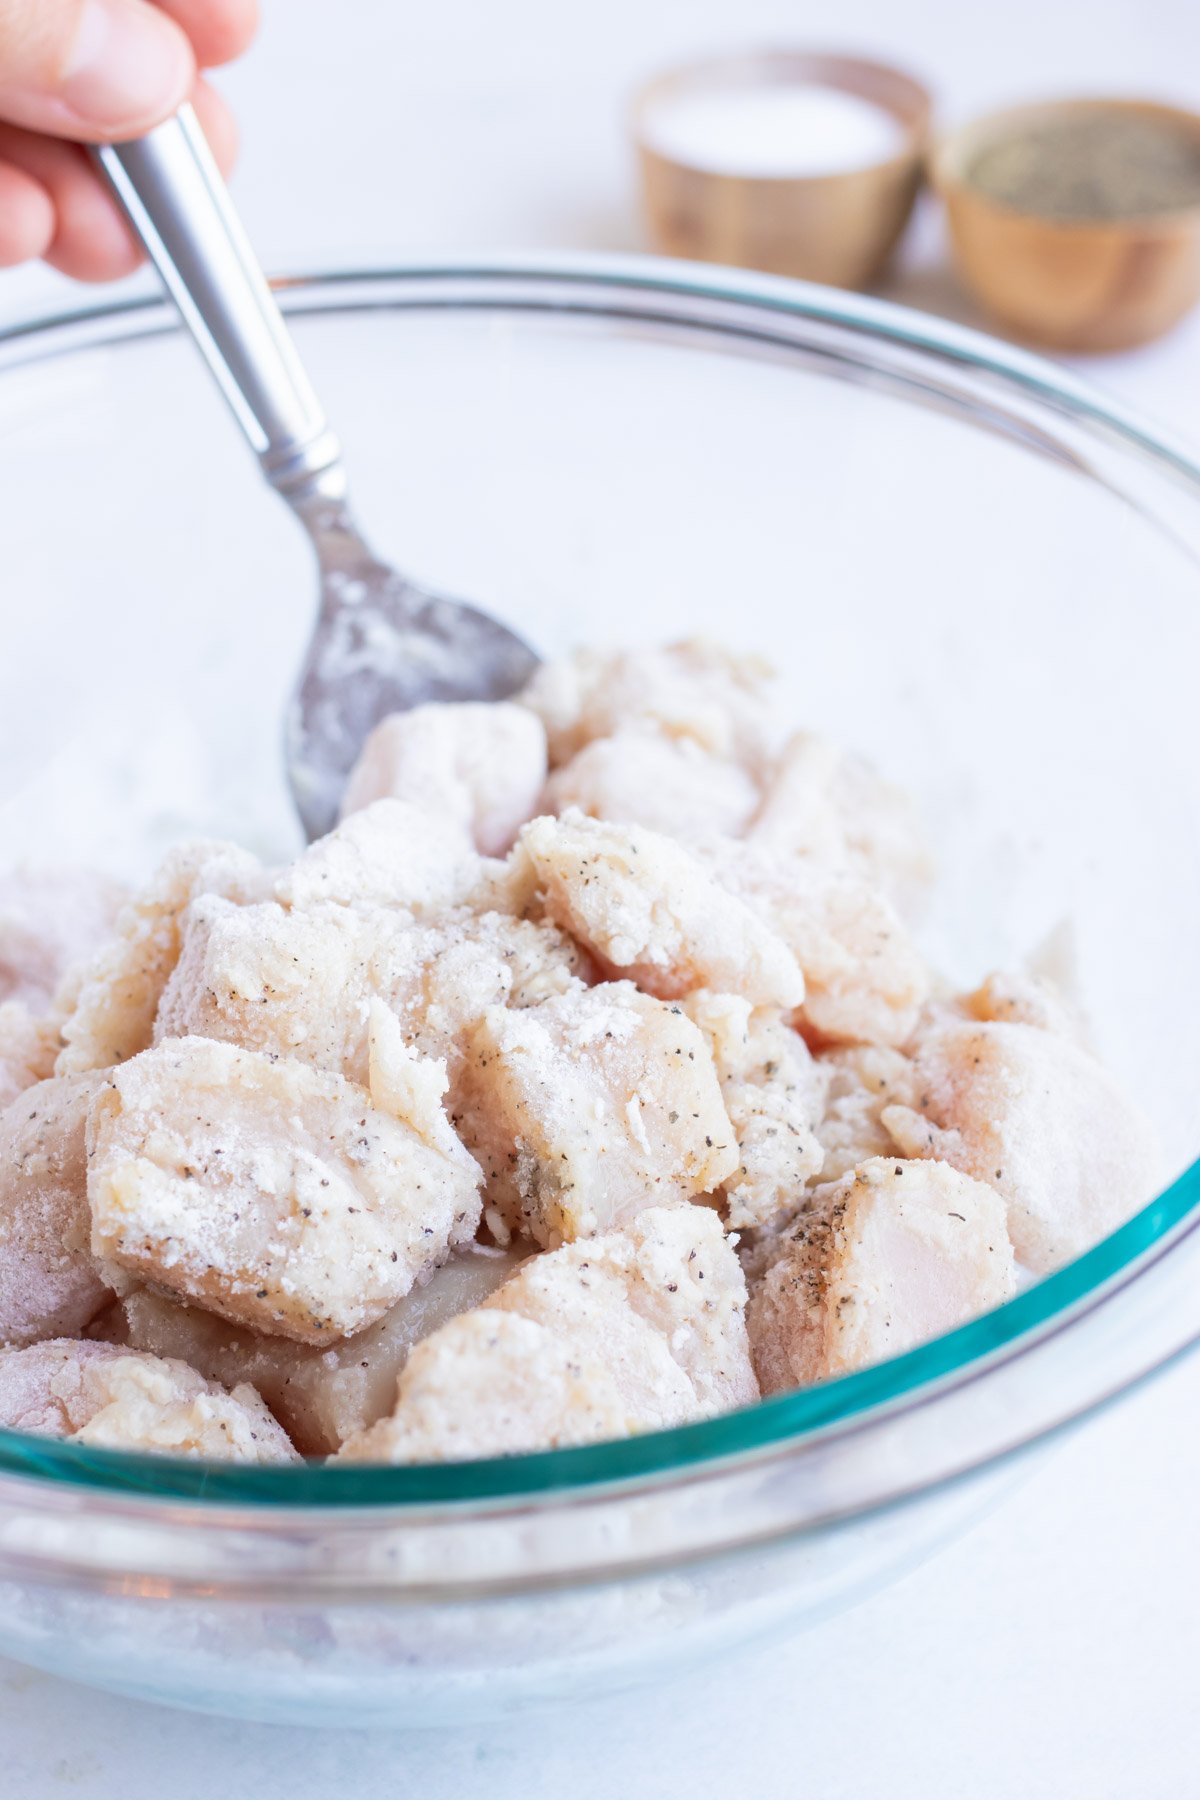 Chicken cubes being tossed in a flour mixture.